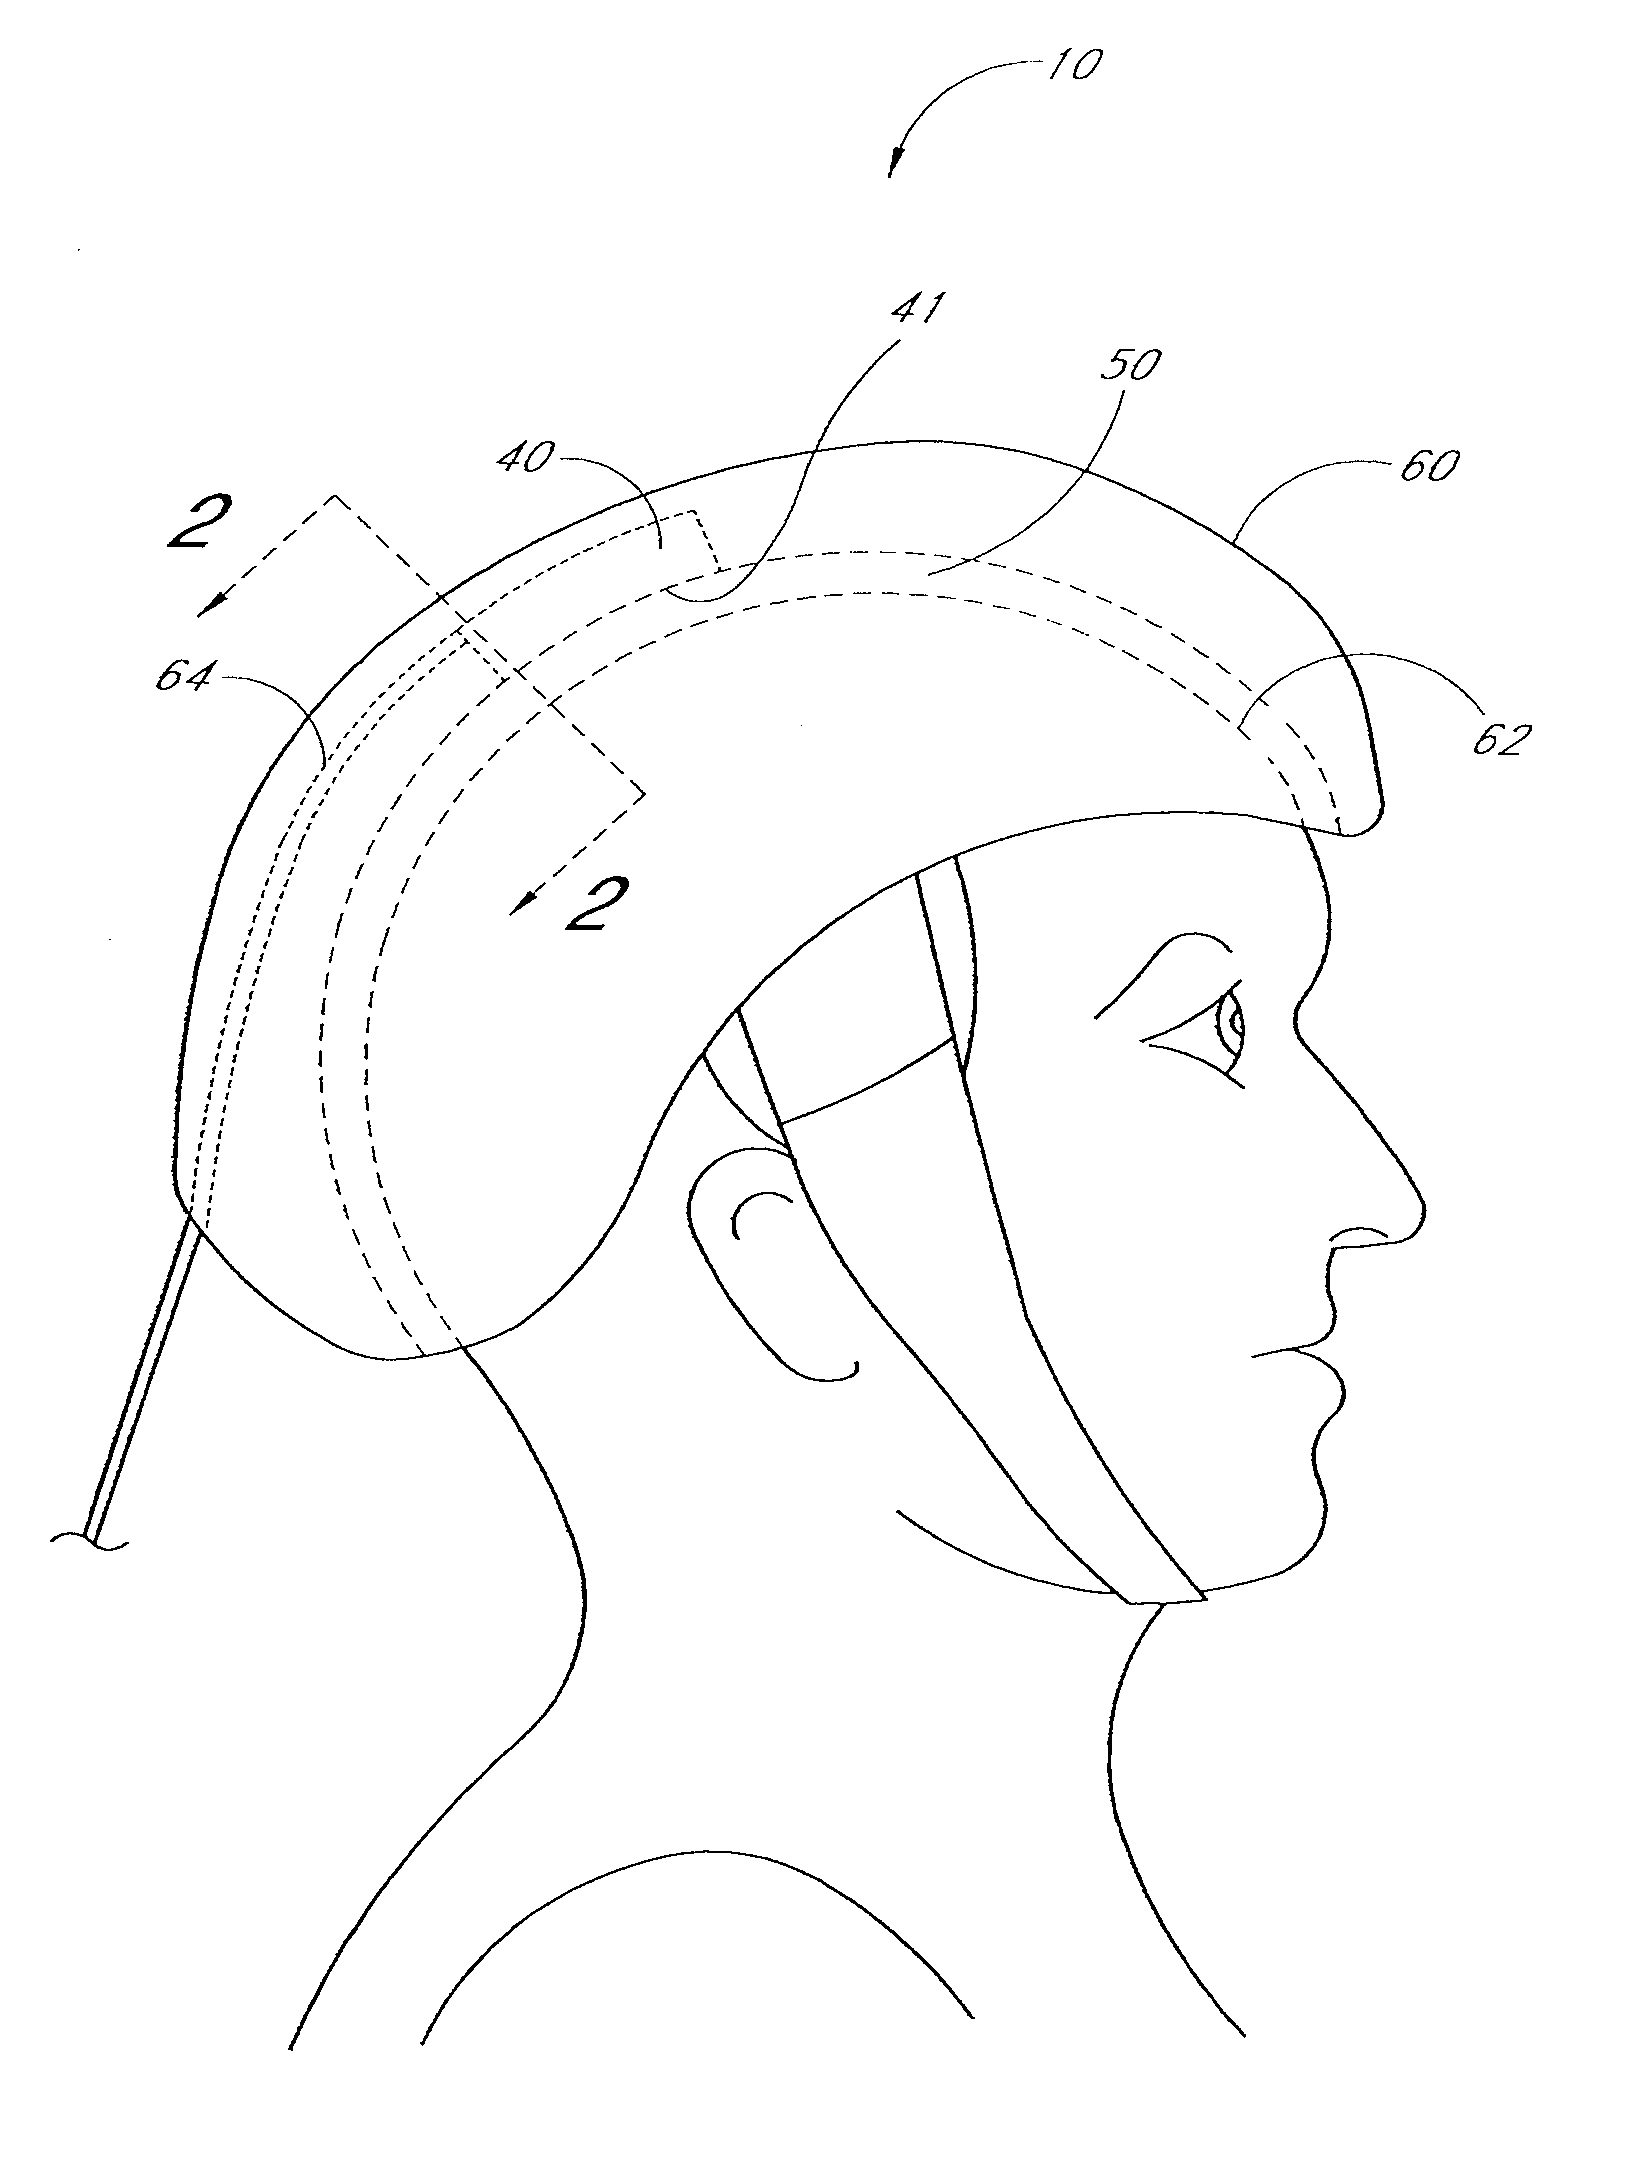 Method of treatment of neurological injury or cancer by administration of dichloroacetate